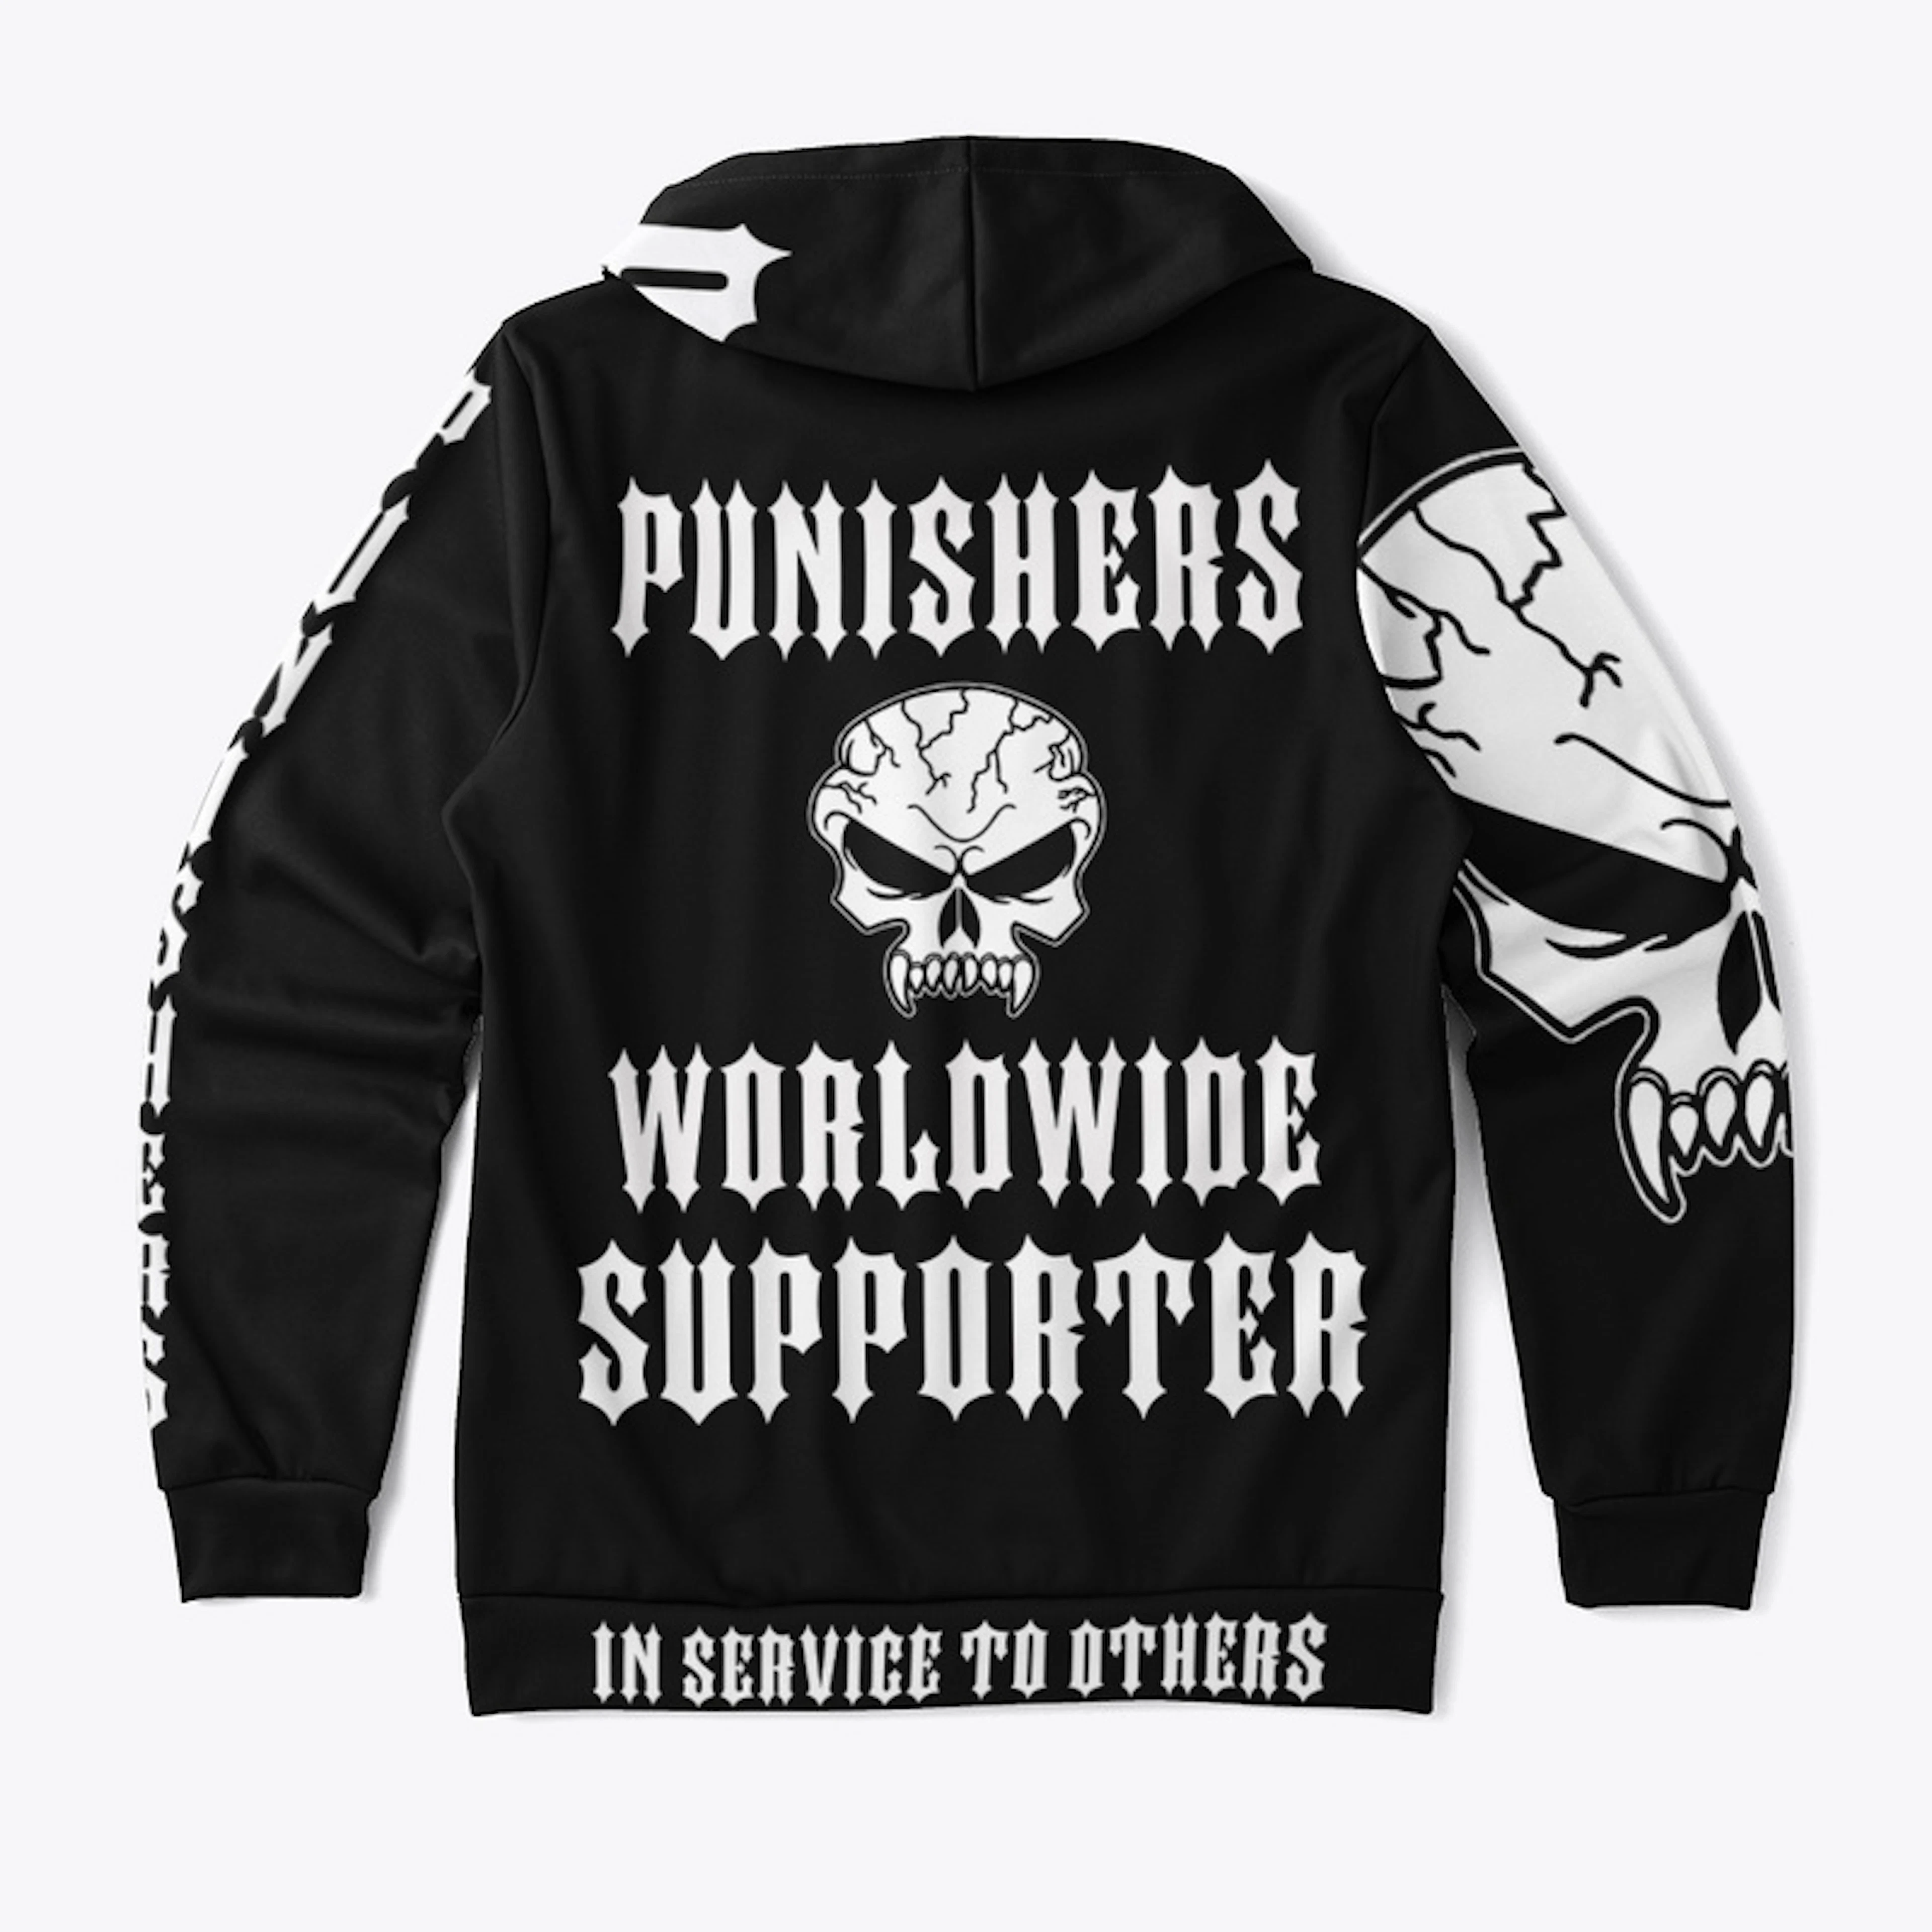 PUNISHERS All Over Print SUPPORTER Hoody